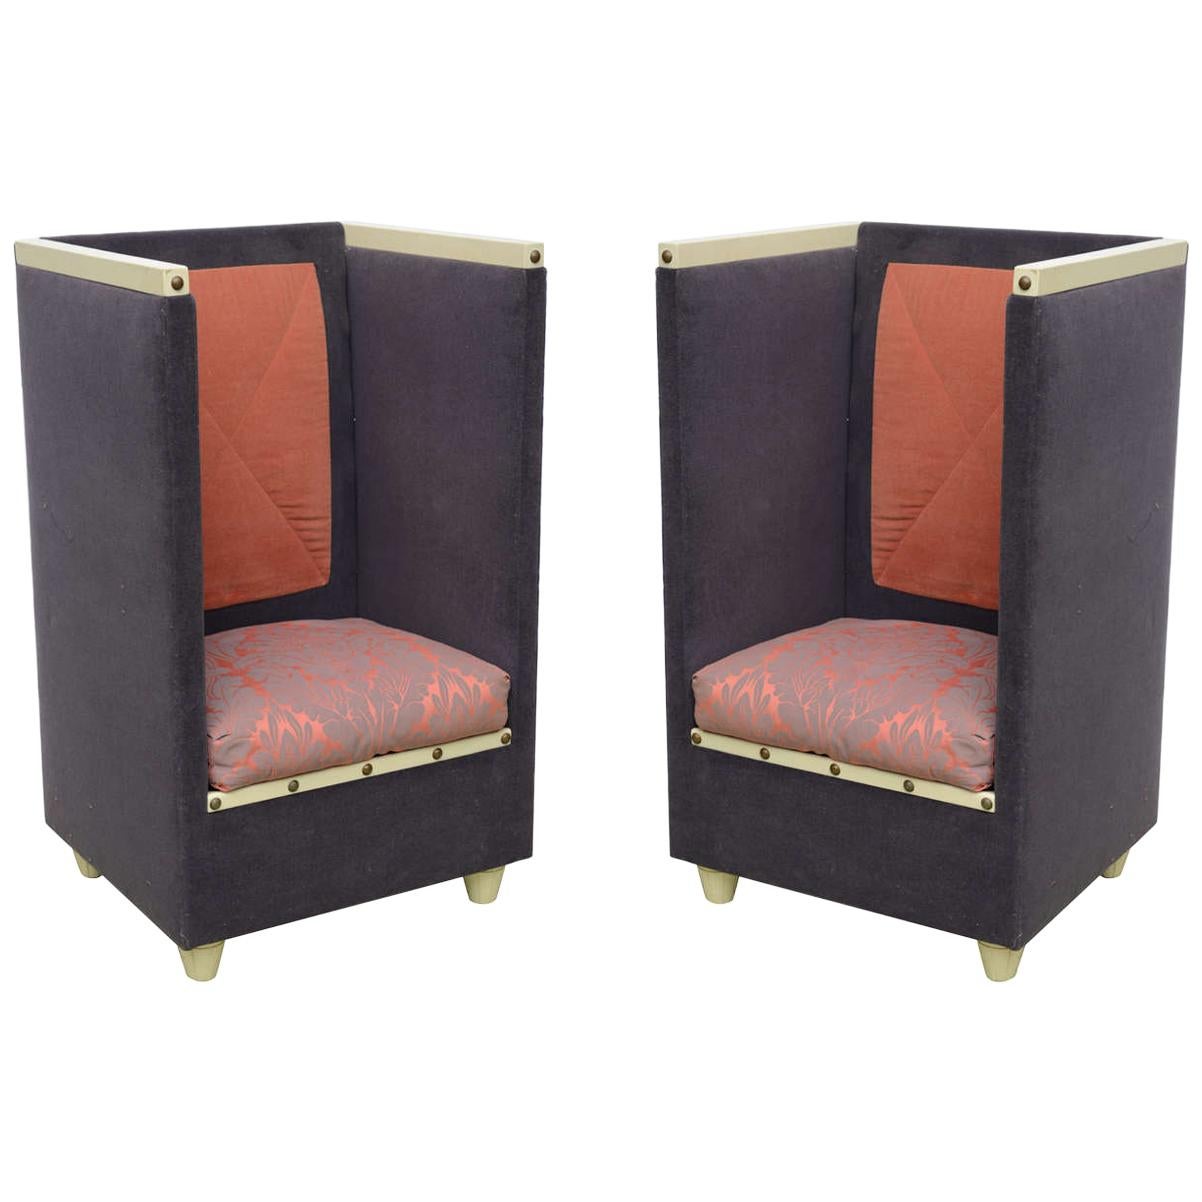 Ronn Jaffe’s Limited Edition Iconic Pair Throne Chairs For Sale